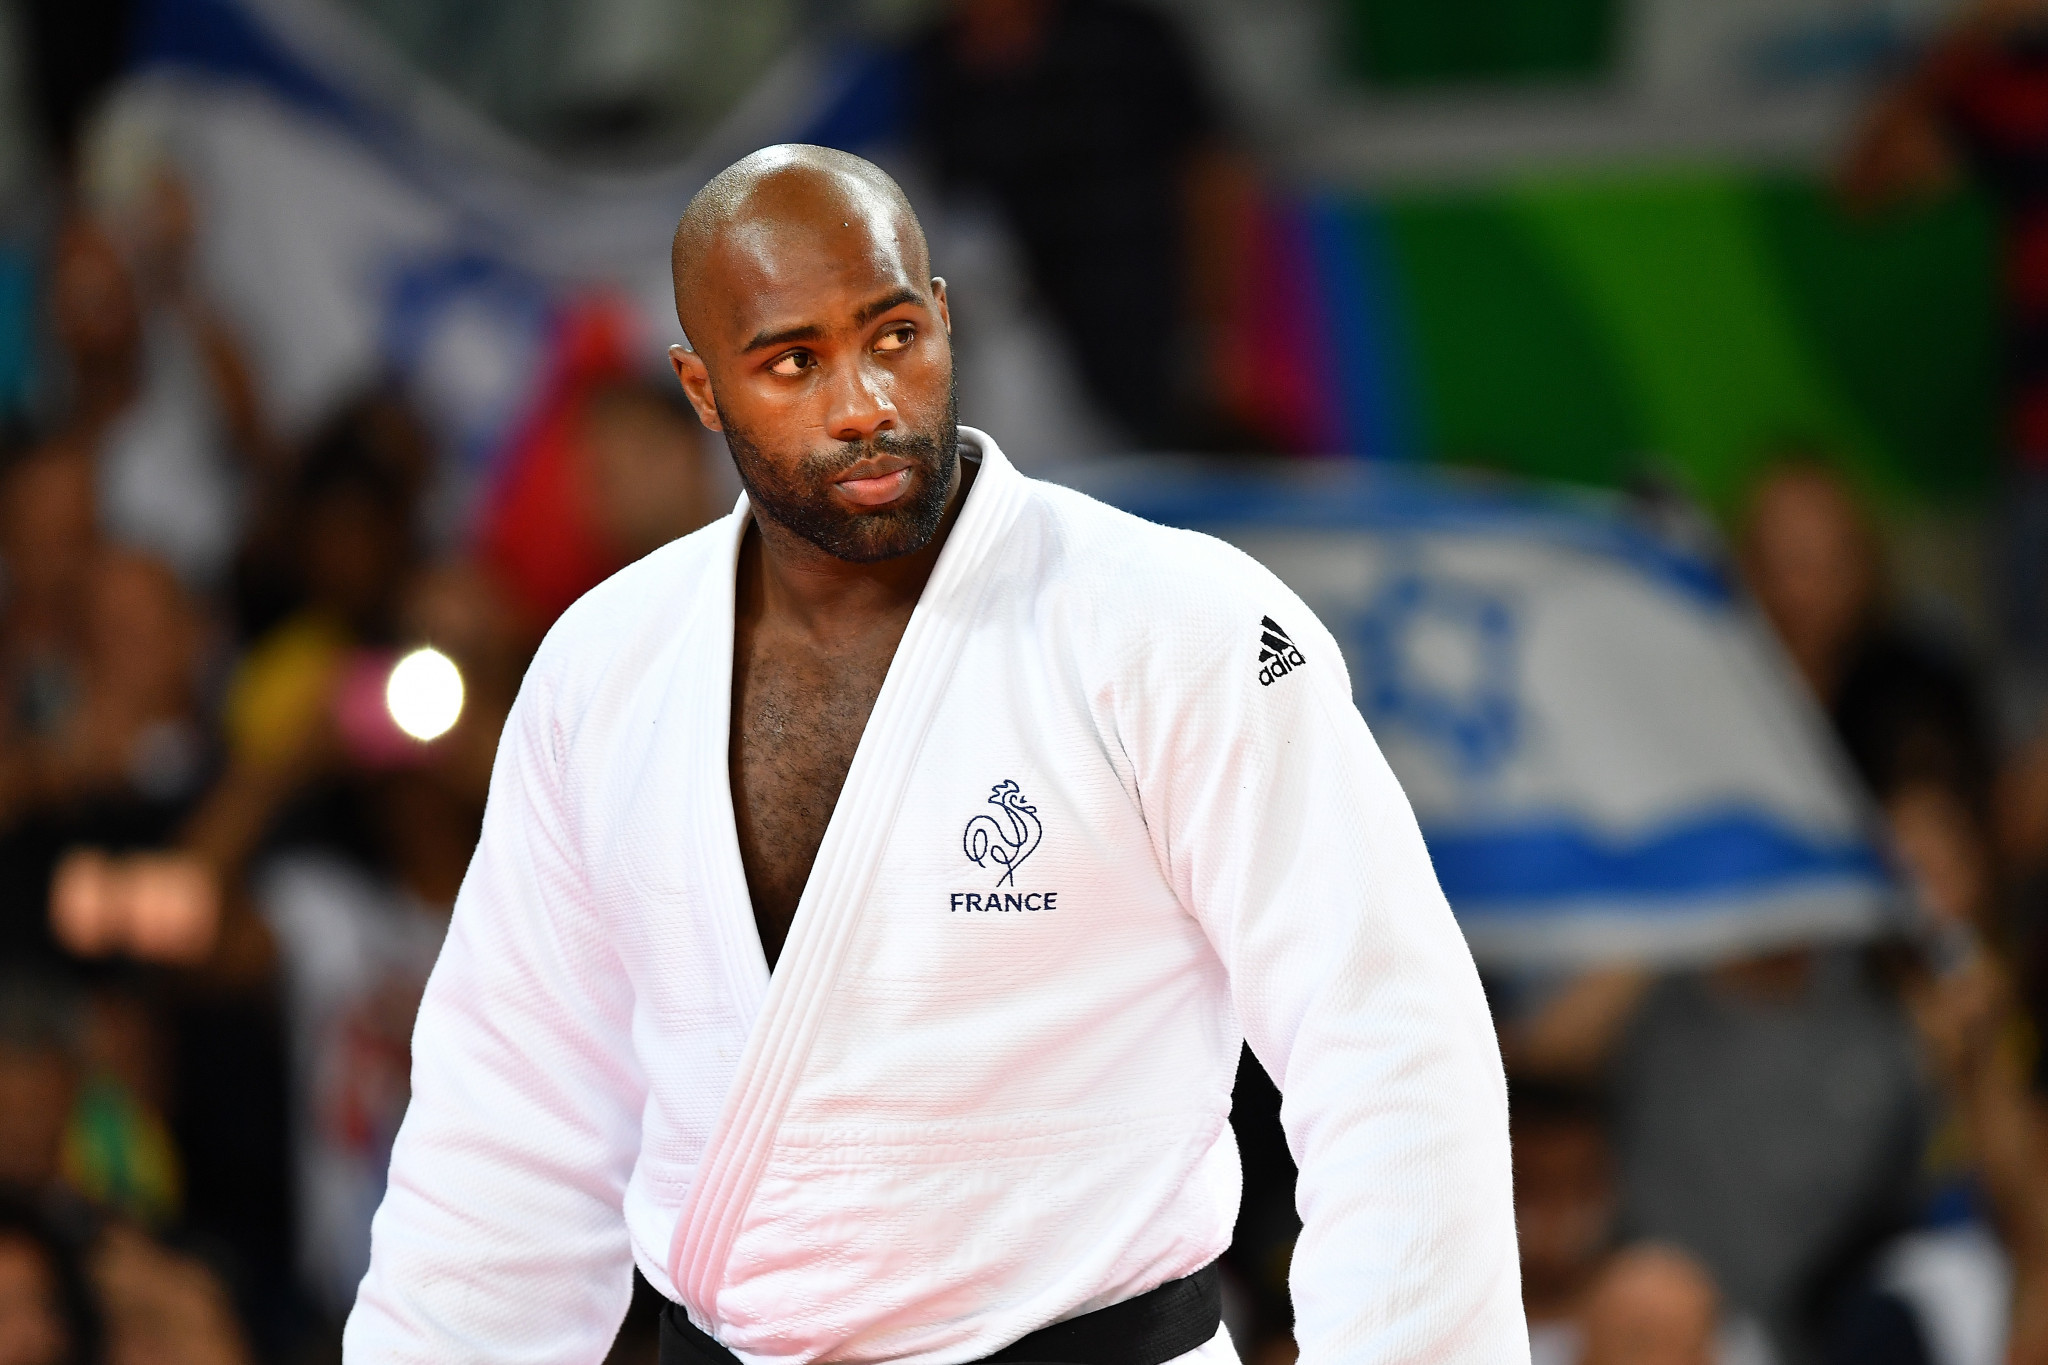 Three-time Olympic gold medallist Riner withdraws from Judo World Championships to concentrate on Paris 2024